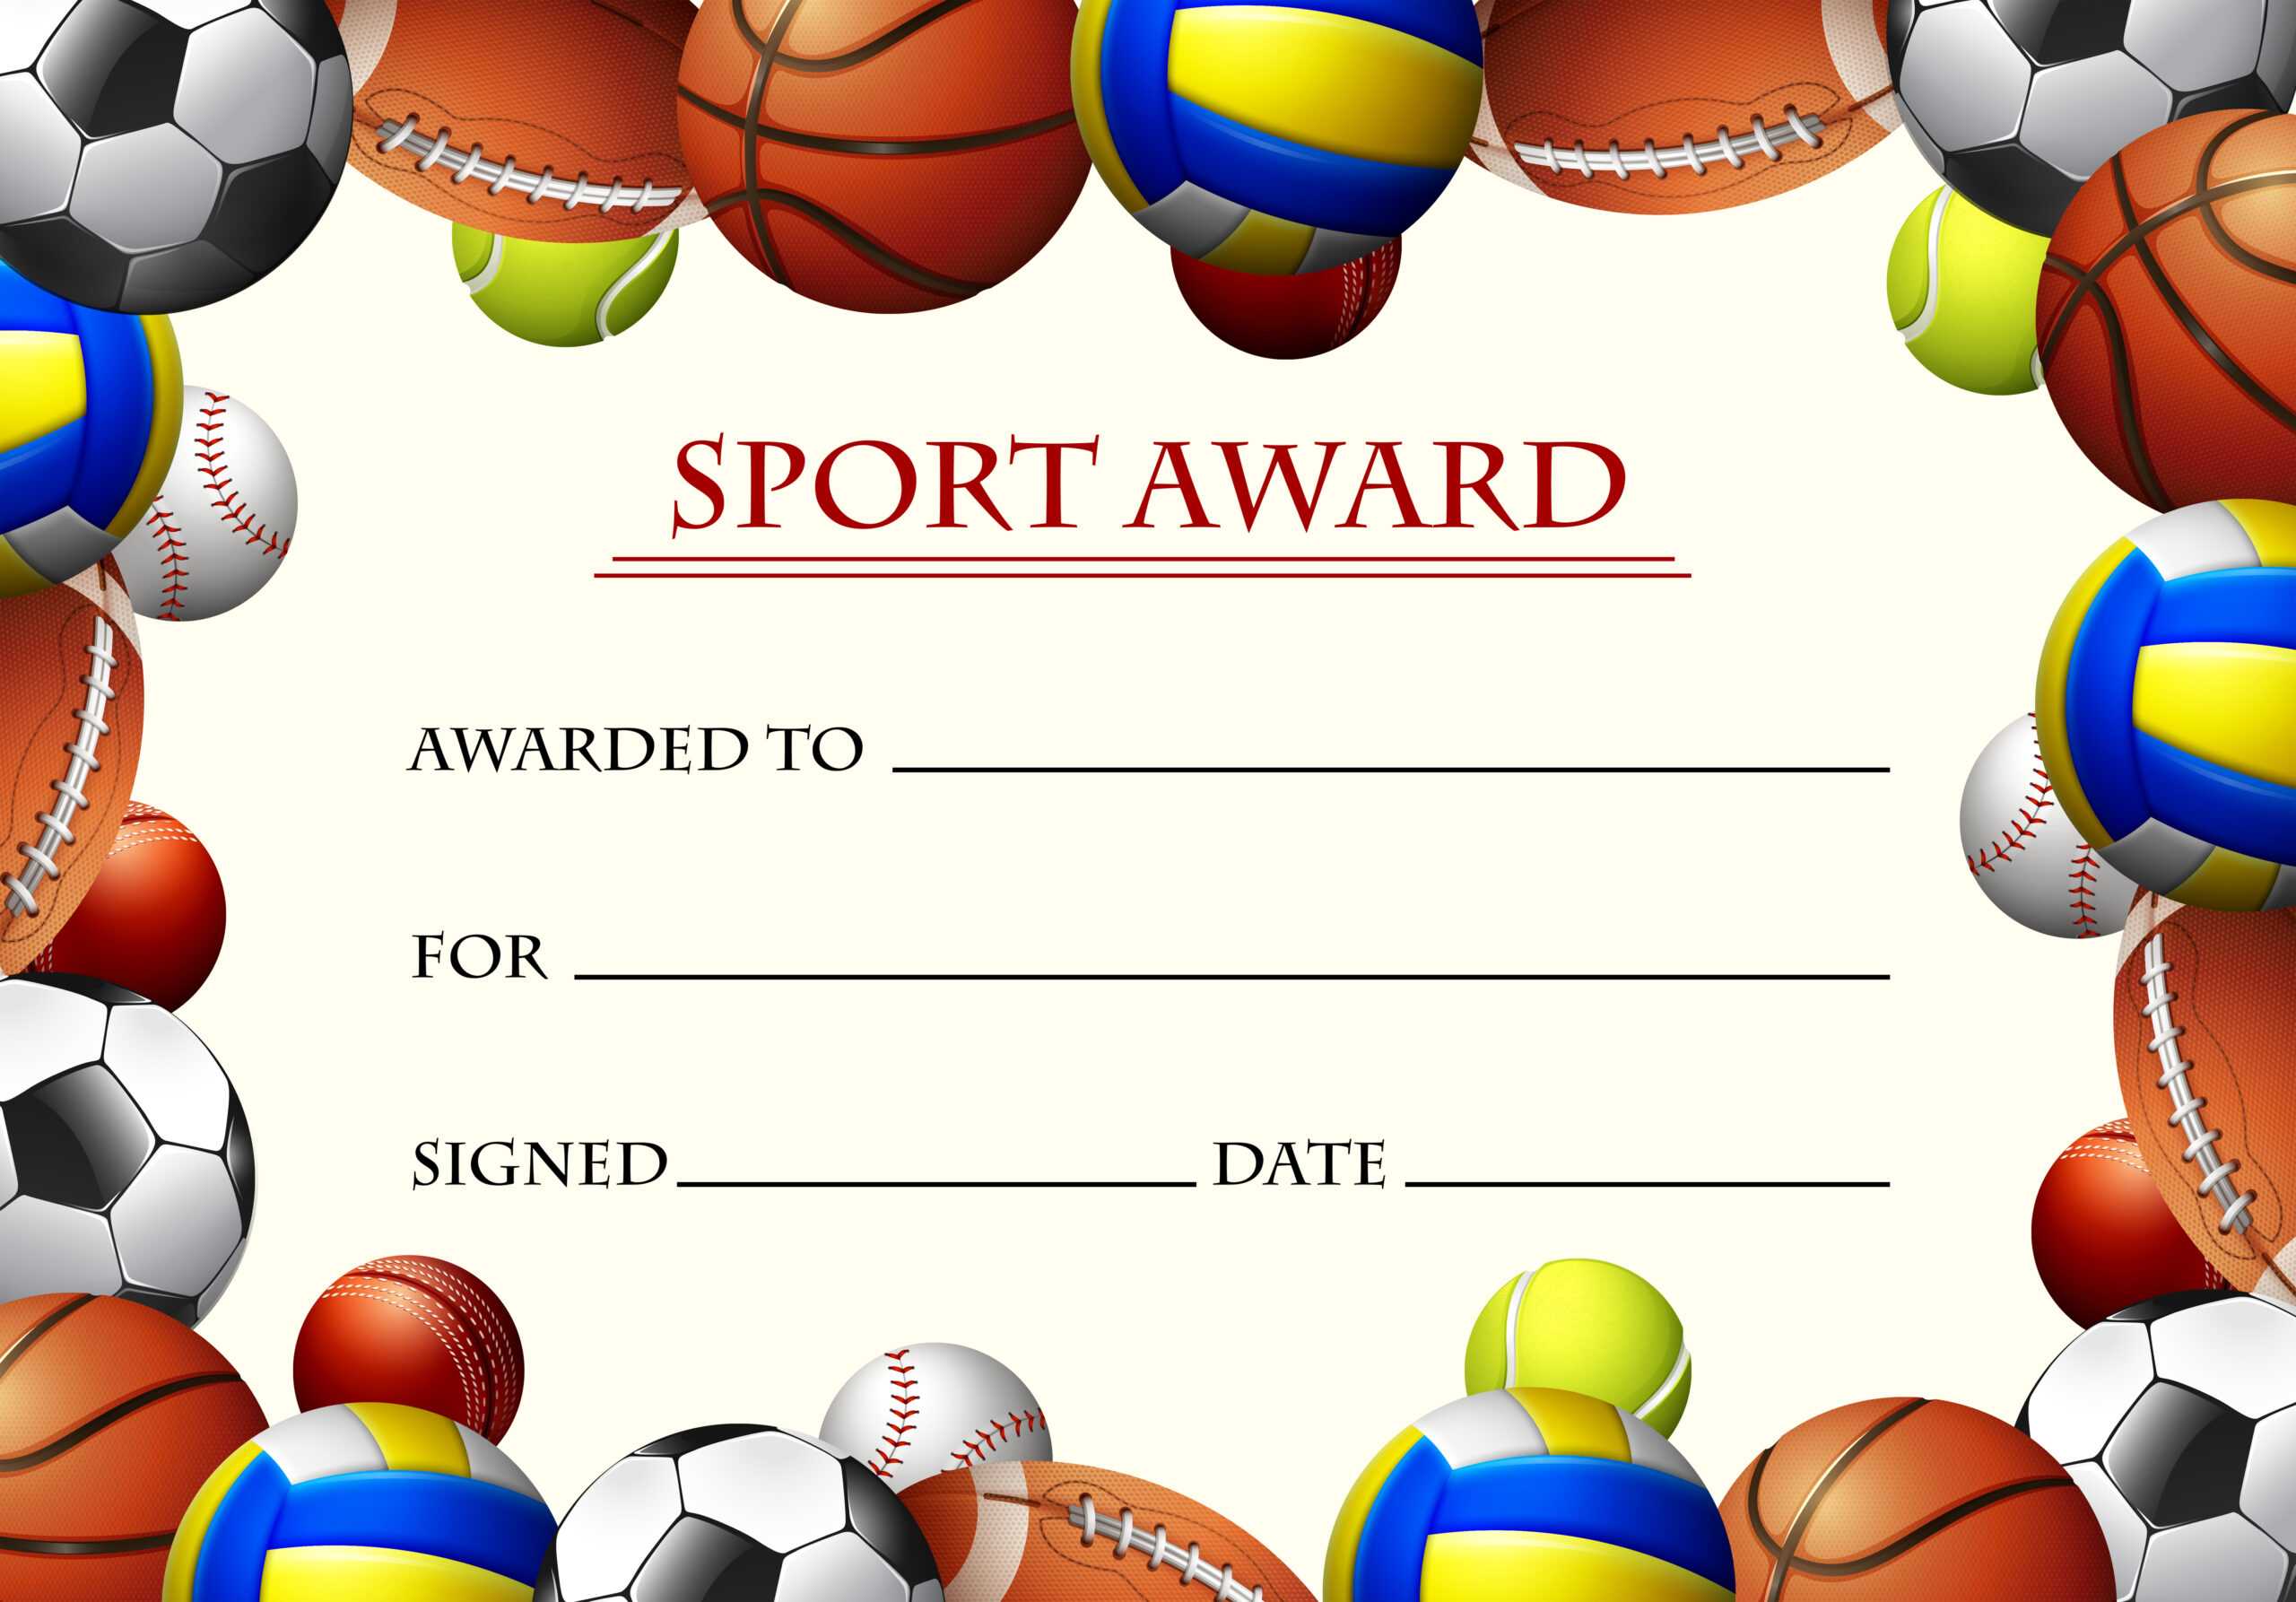 Certificate Template For Sport Award – Download Free Vectors Pertaining To Soccer Award Certificate Templates Free